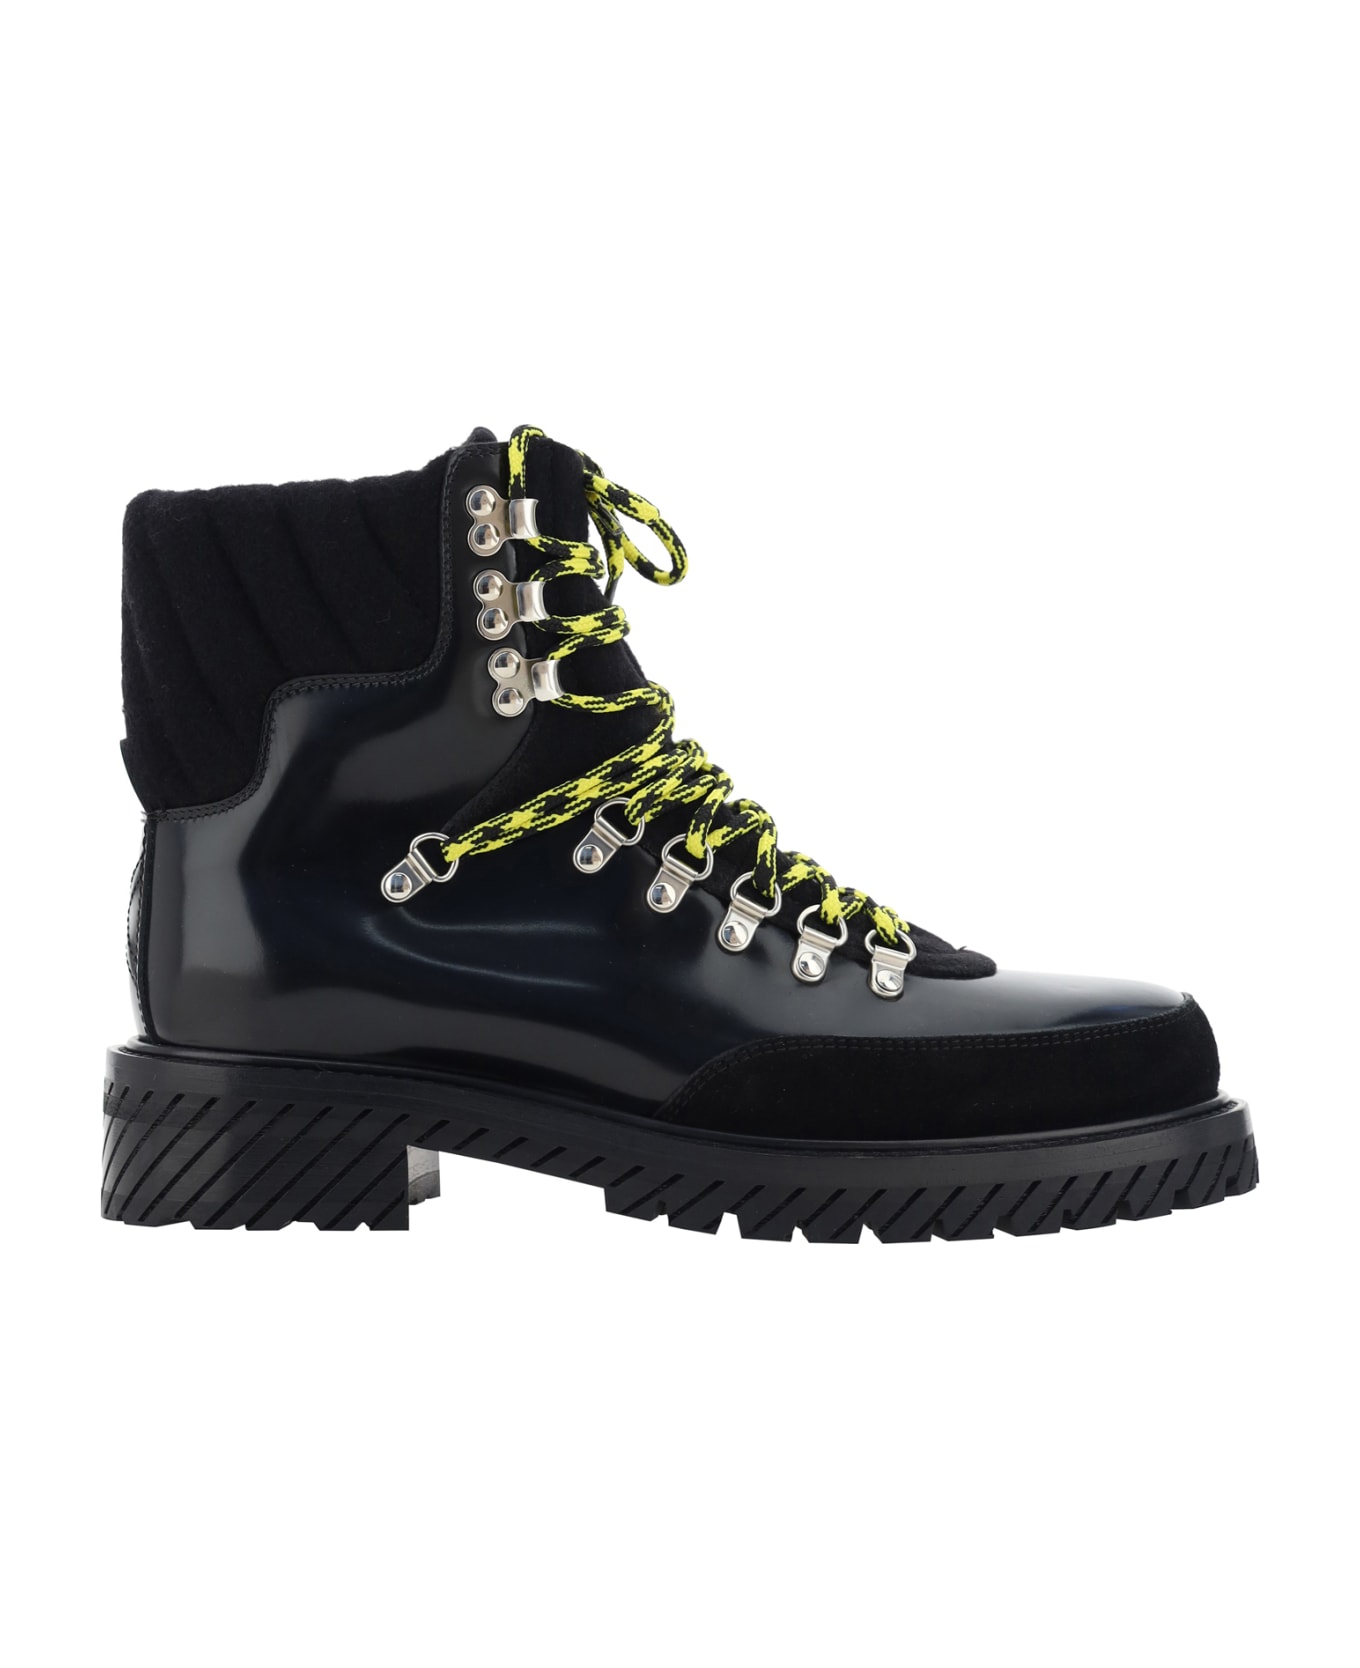 Off-White Gstaad Lace-up Boots - Black Blac ブーツ